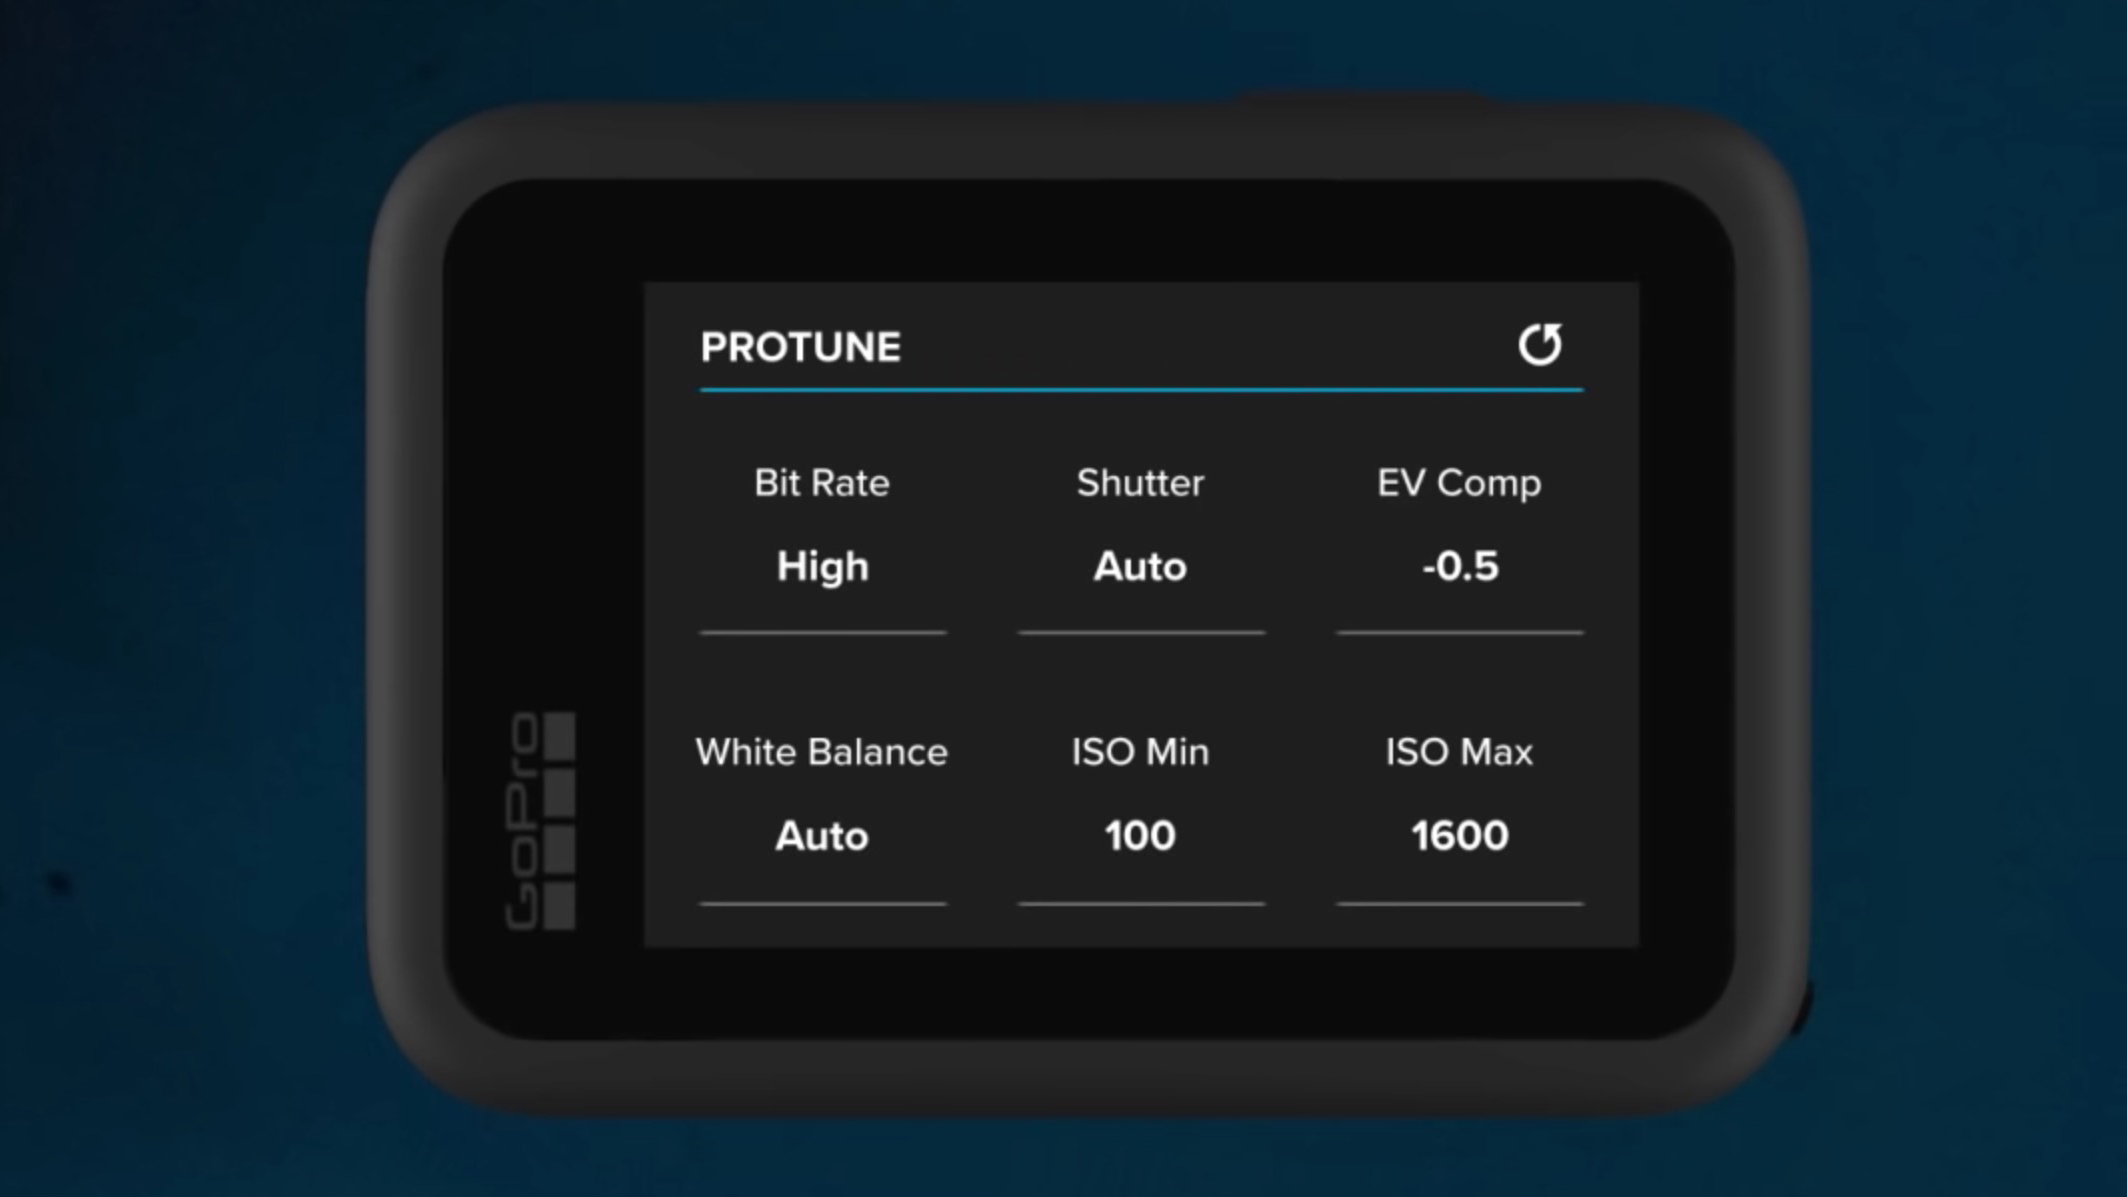 The back of the GoPro camera showing the ProTune settings menu